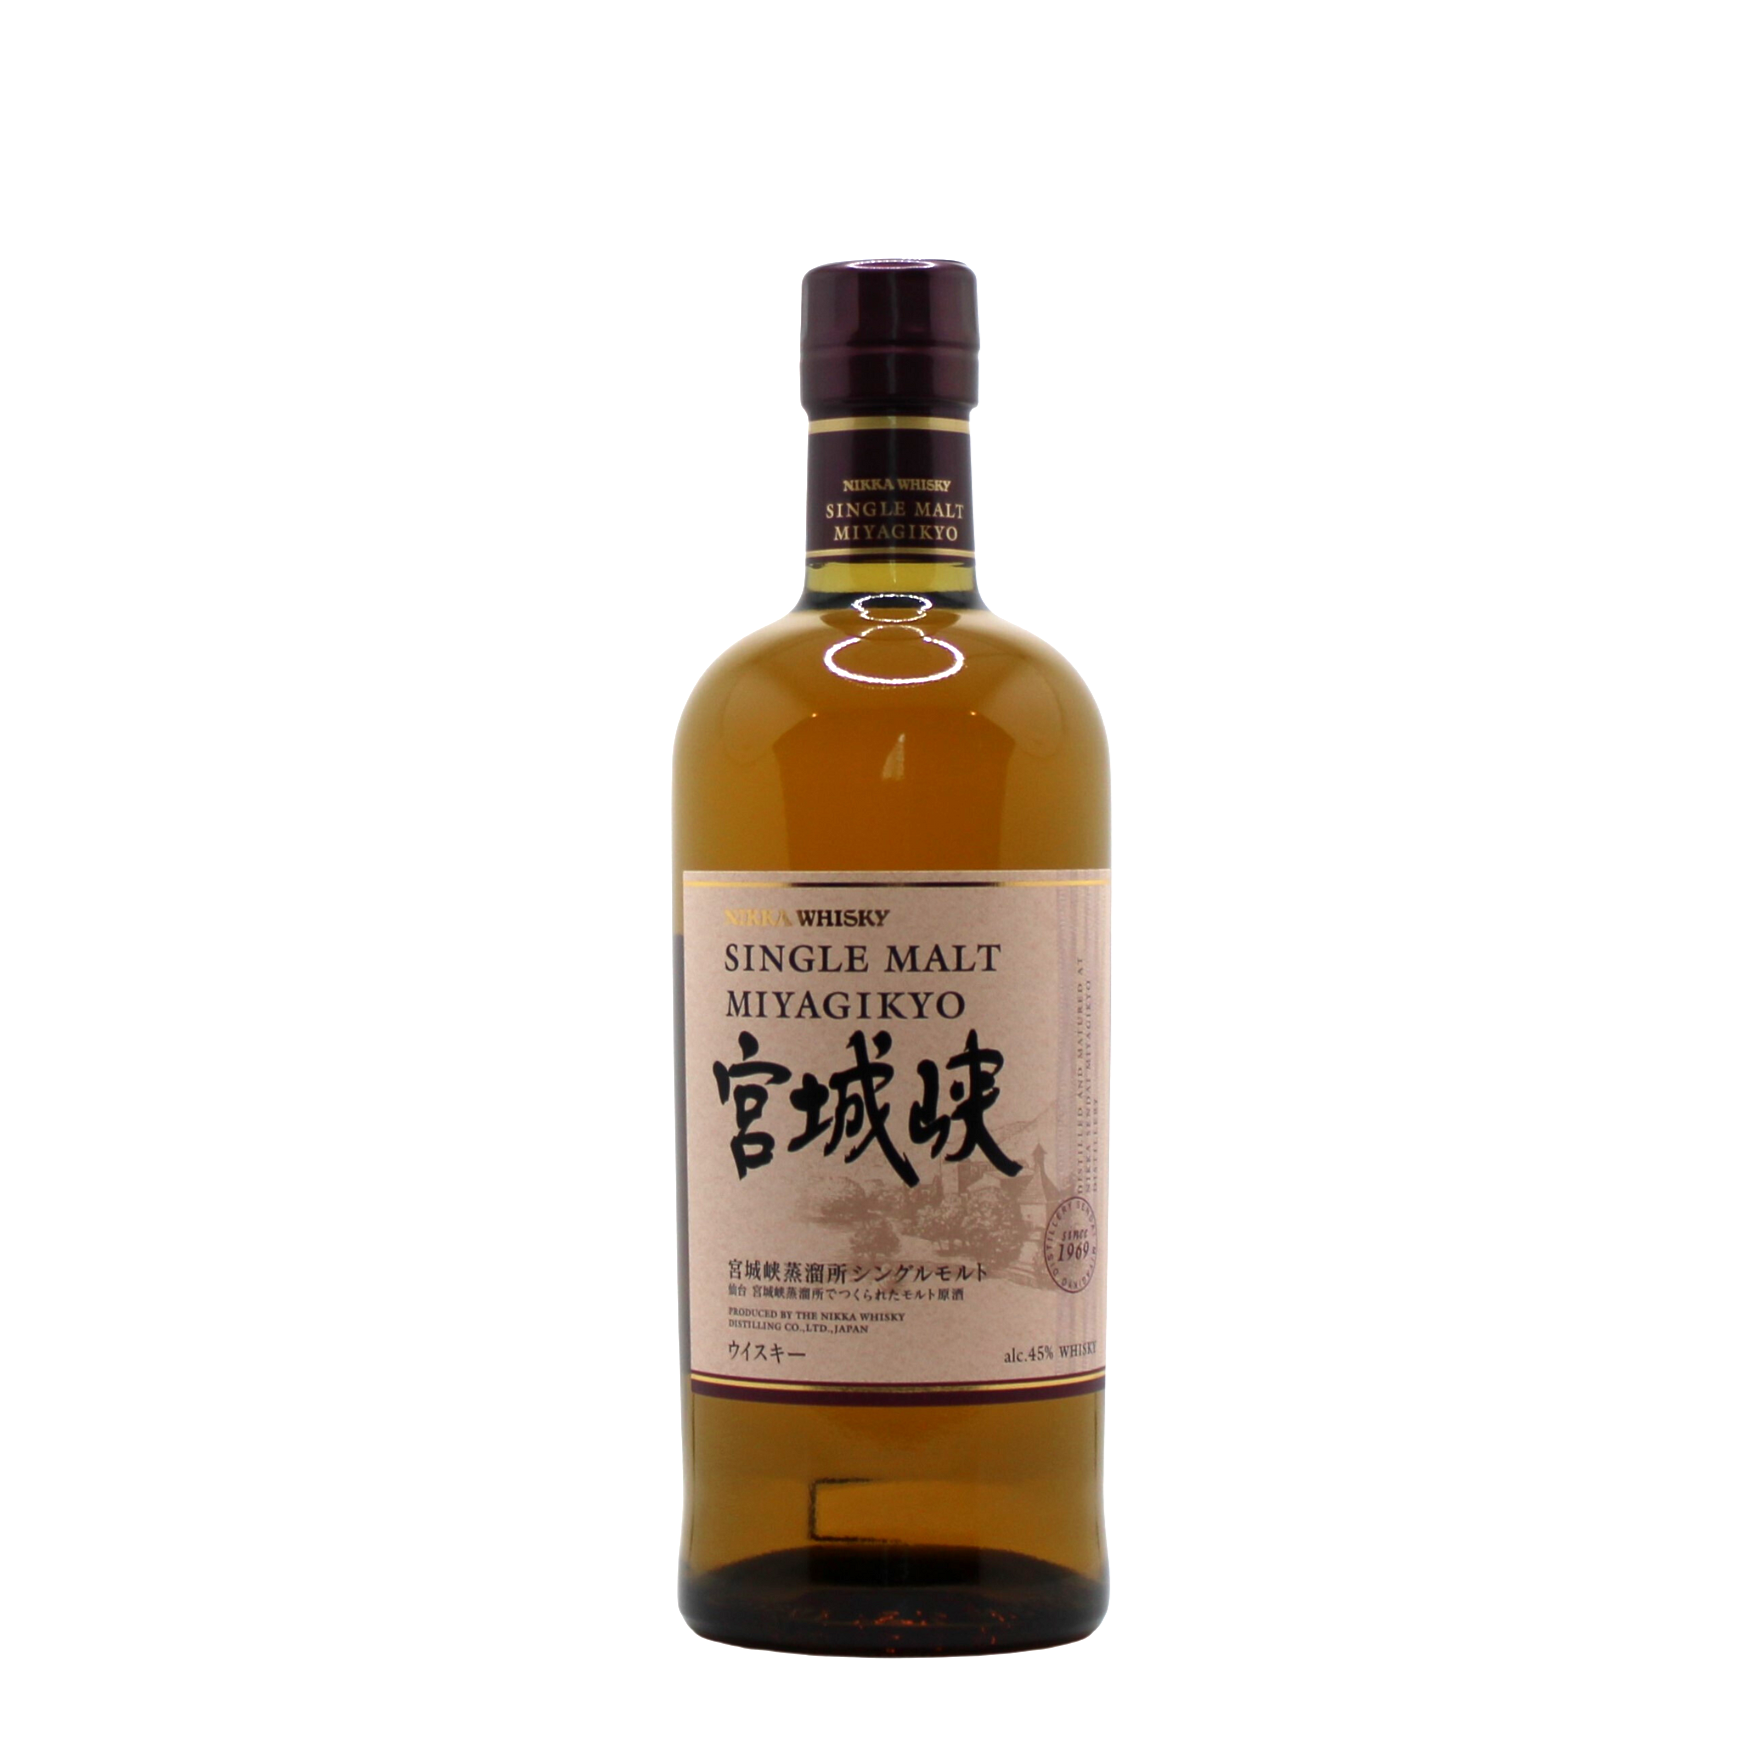 The new single malt from the Miyagikyo Distillery of Nikka is a vatting of various aged whiskies matured in primarily ex-Sherry casks. Color: Gold Nose: Full flavoured and rich floral notes, beeswax and tropical fruits Palate: Malty cereal balanced with spices such as cinnamon, some ginger and chocolate at the back. Finish: Some tobacco with cooked fruits with a lingering softness. 